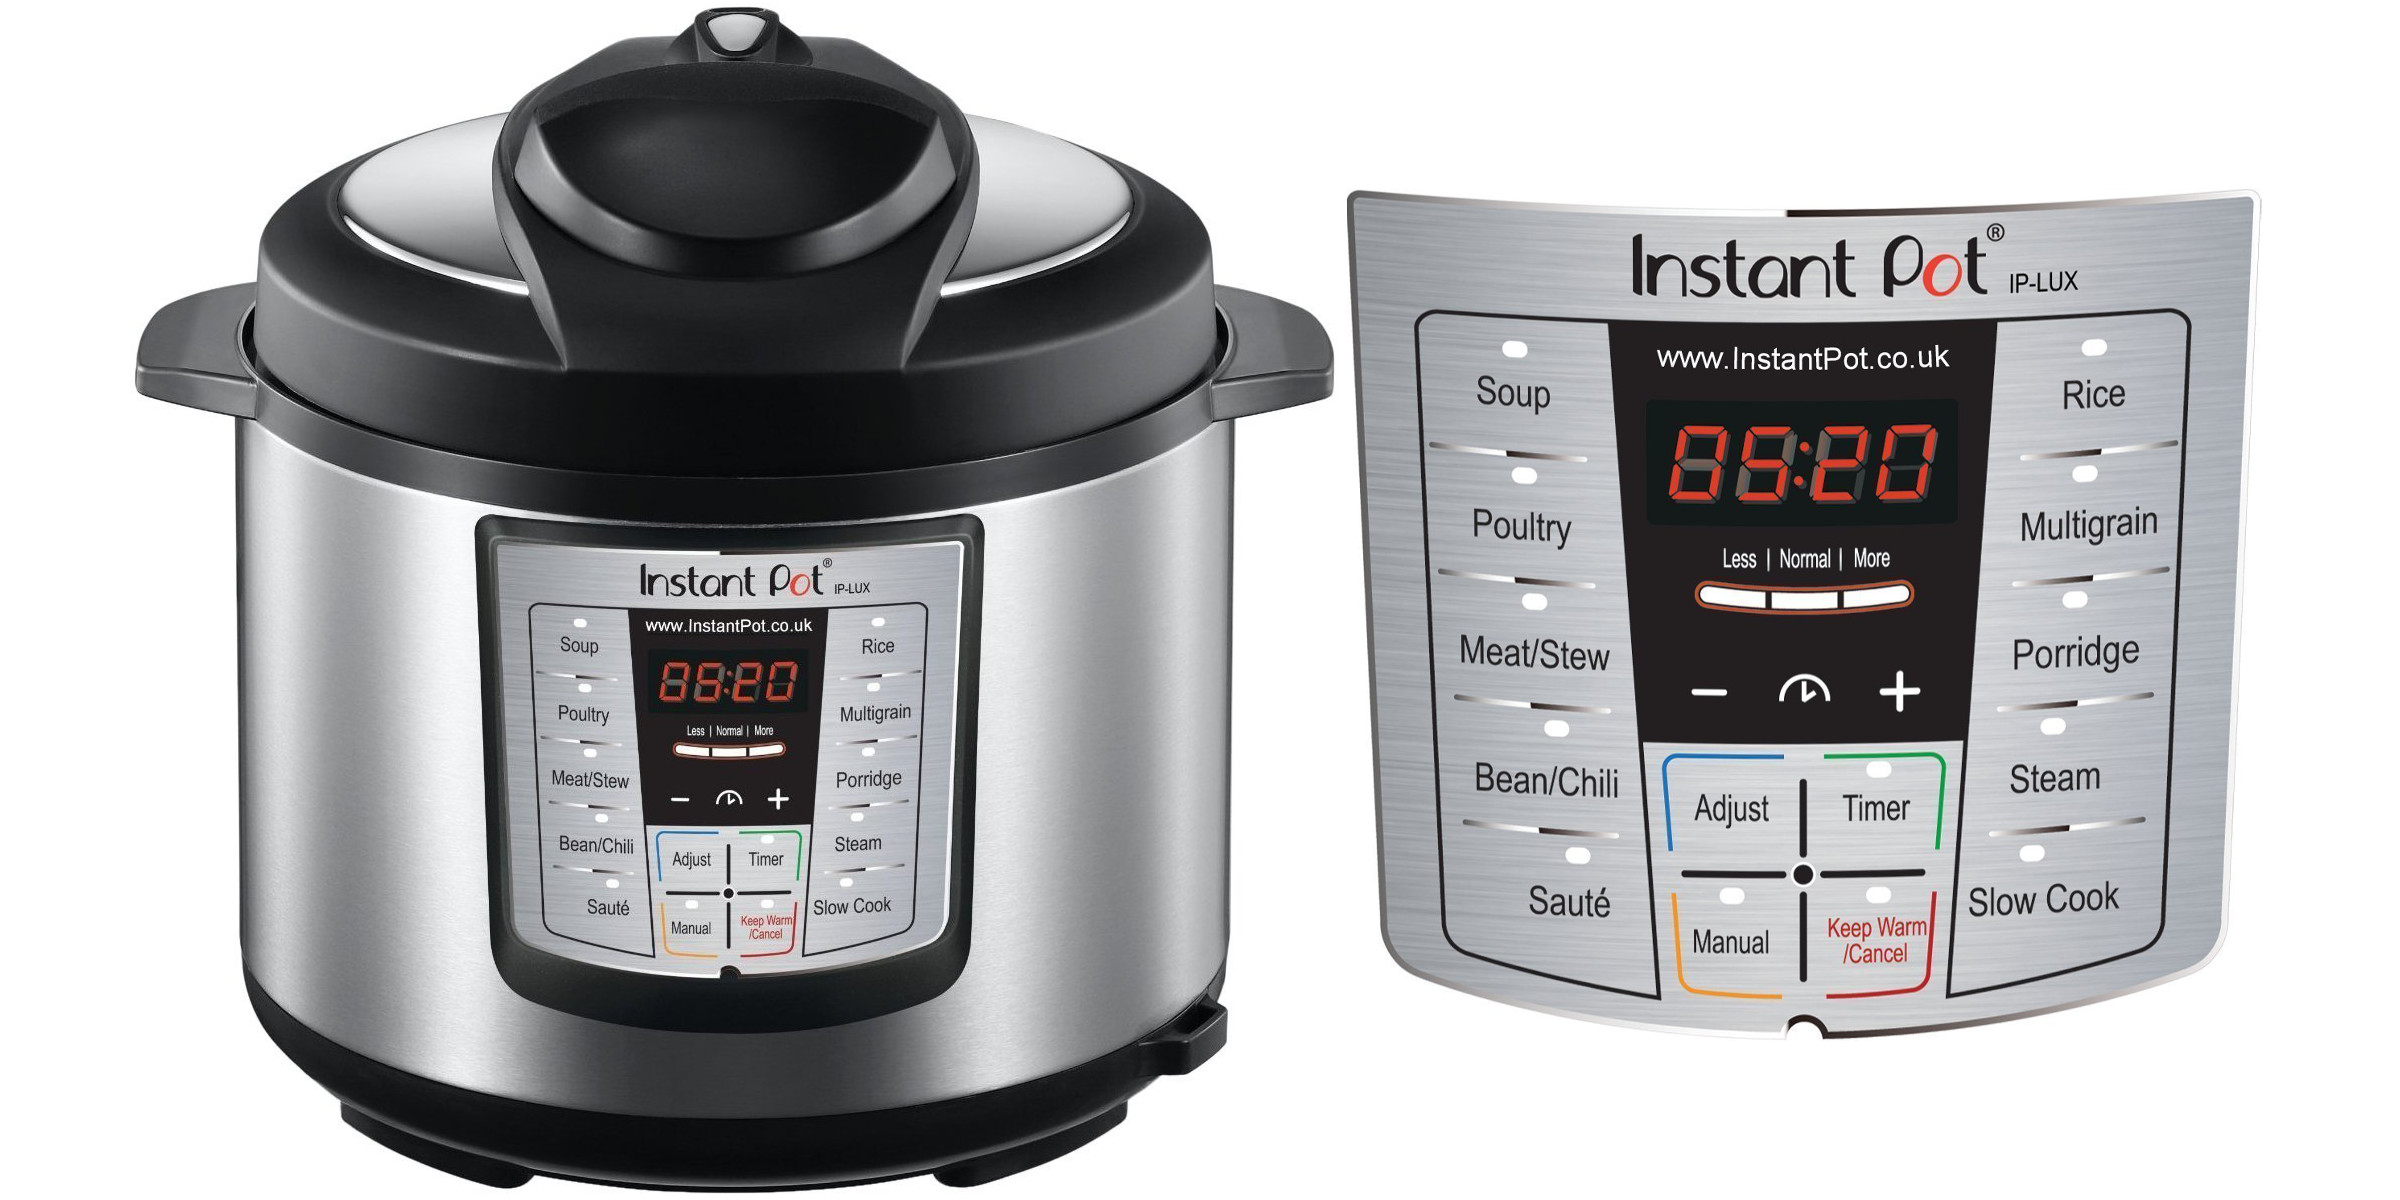 https://9to5toys.com/wp-content/uploads/sites/5/2016/08/6-quart-instant-pot-6-in-1-programmable-pressure-cooker-ip-lux60-1.jpg